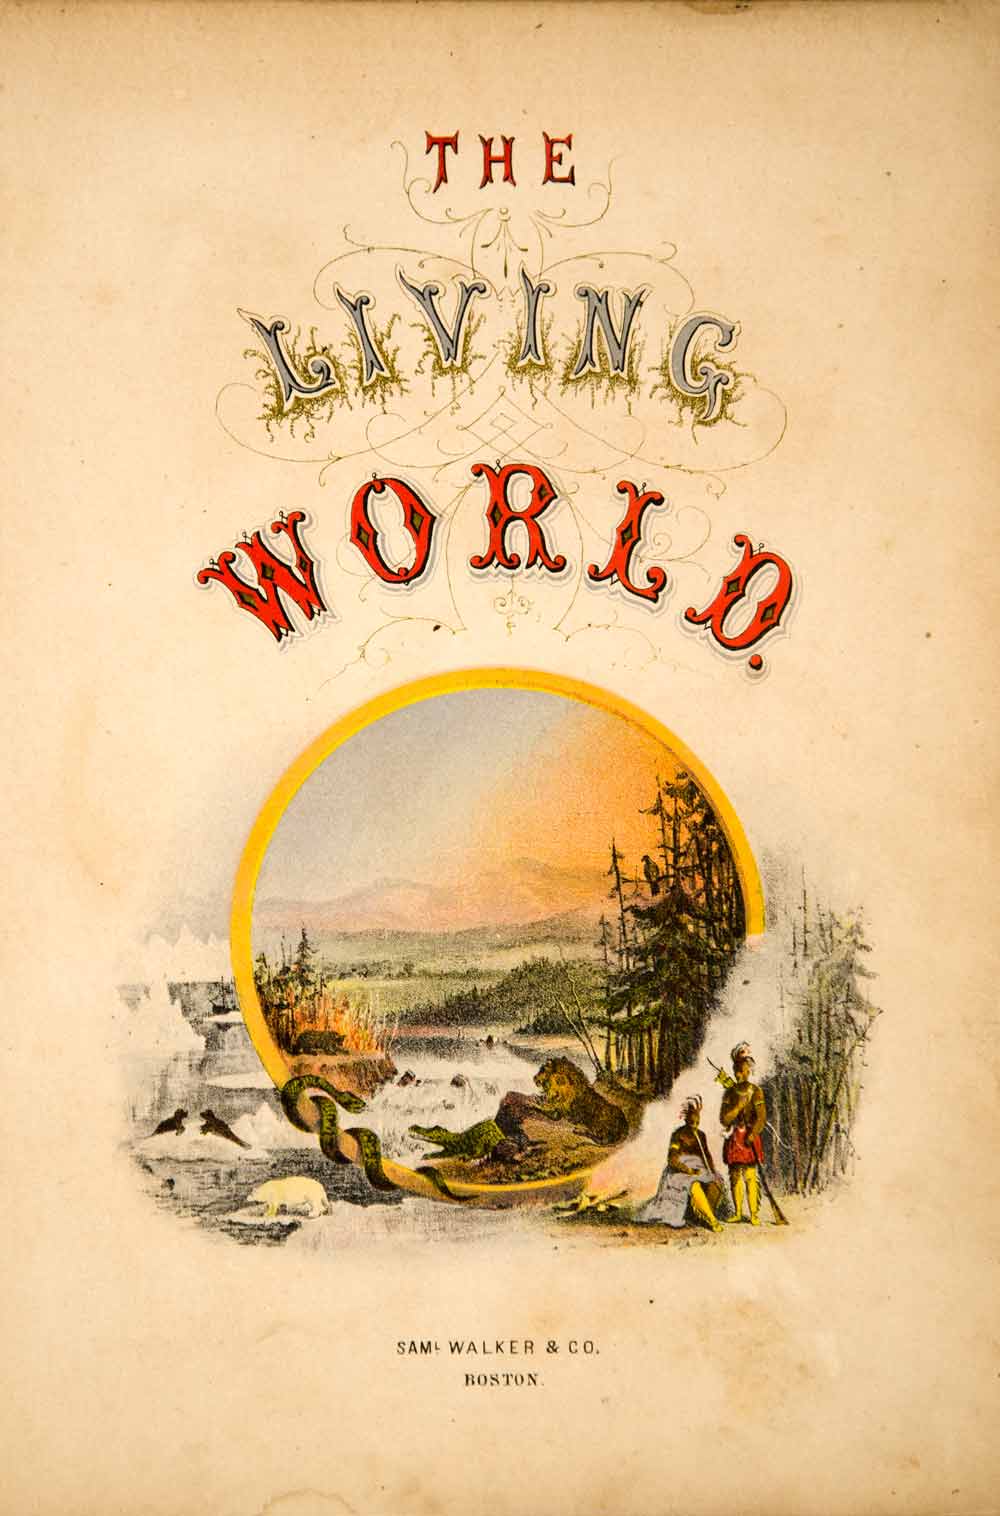 1868 Chromolithograph Title Page Living World Landscape Native Americans TLW3